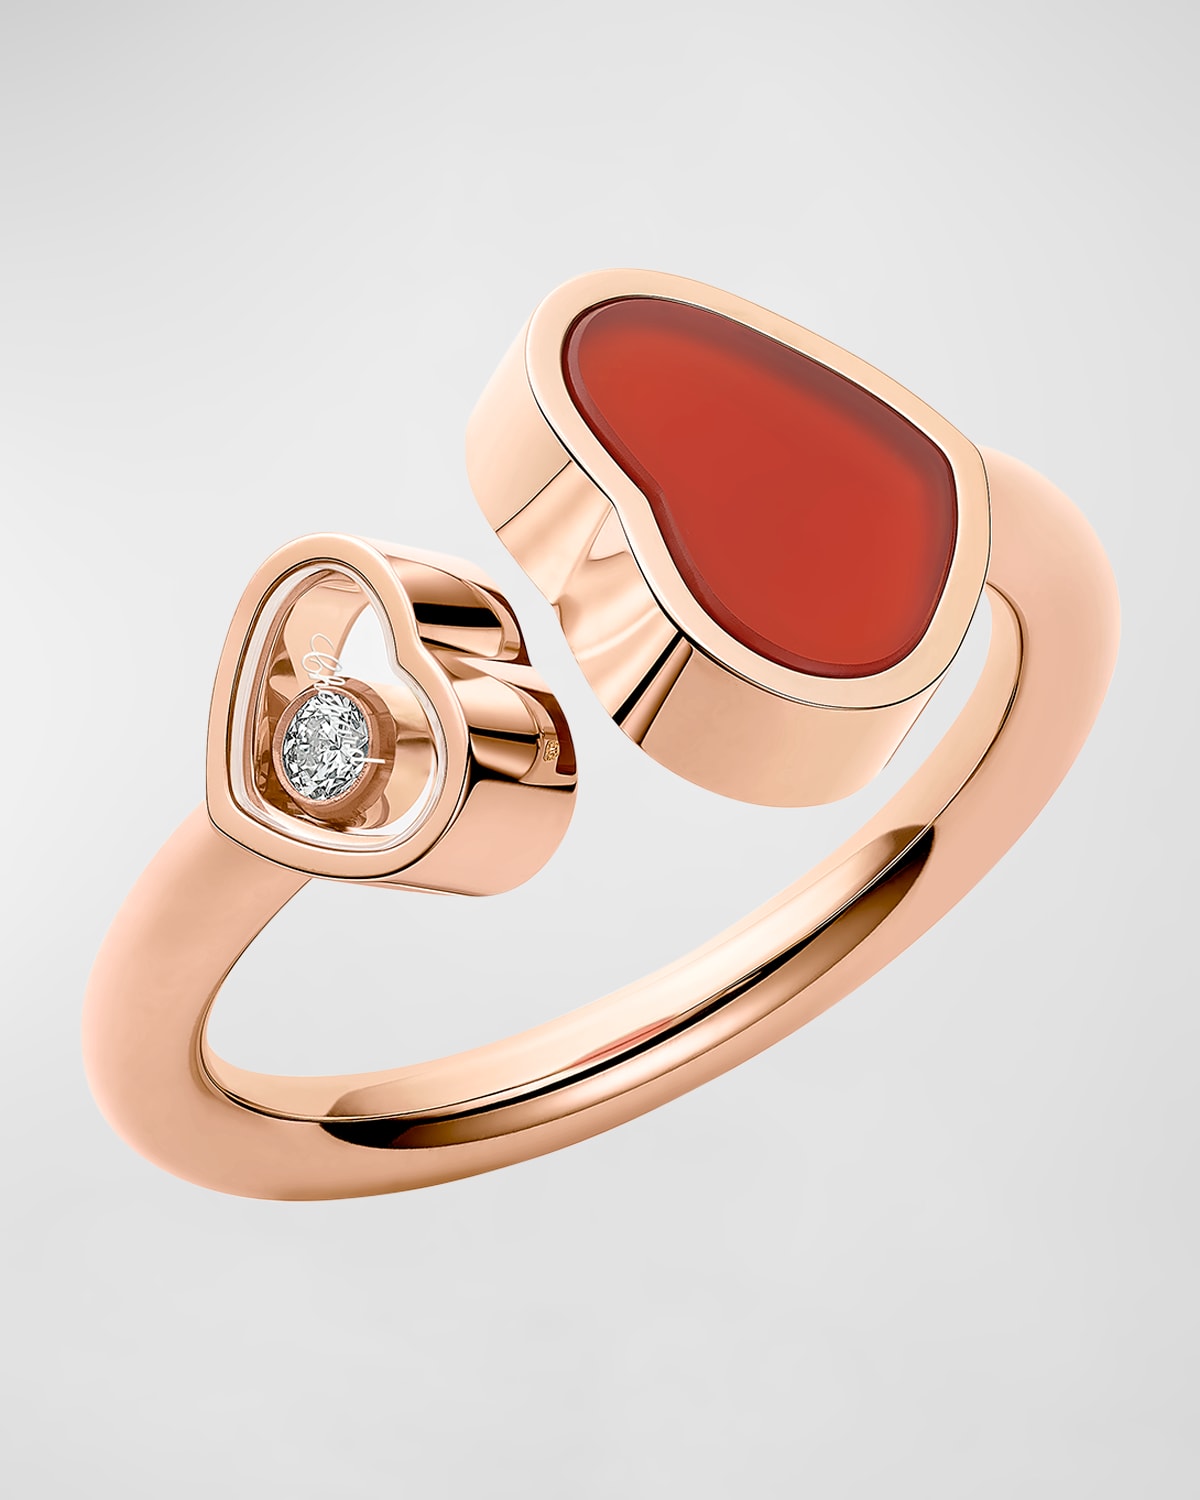 Chopard 18K Rose Gold Happy Heart Carnelian and Diamond Ring, Size 52